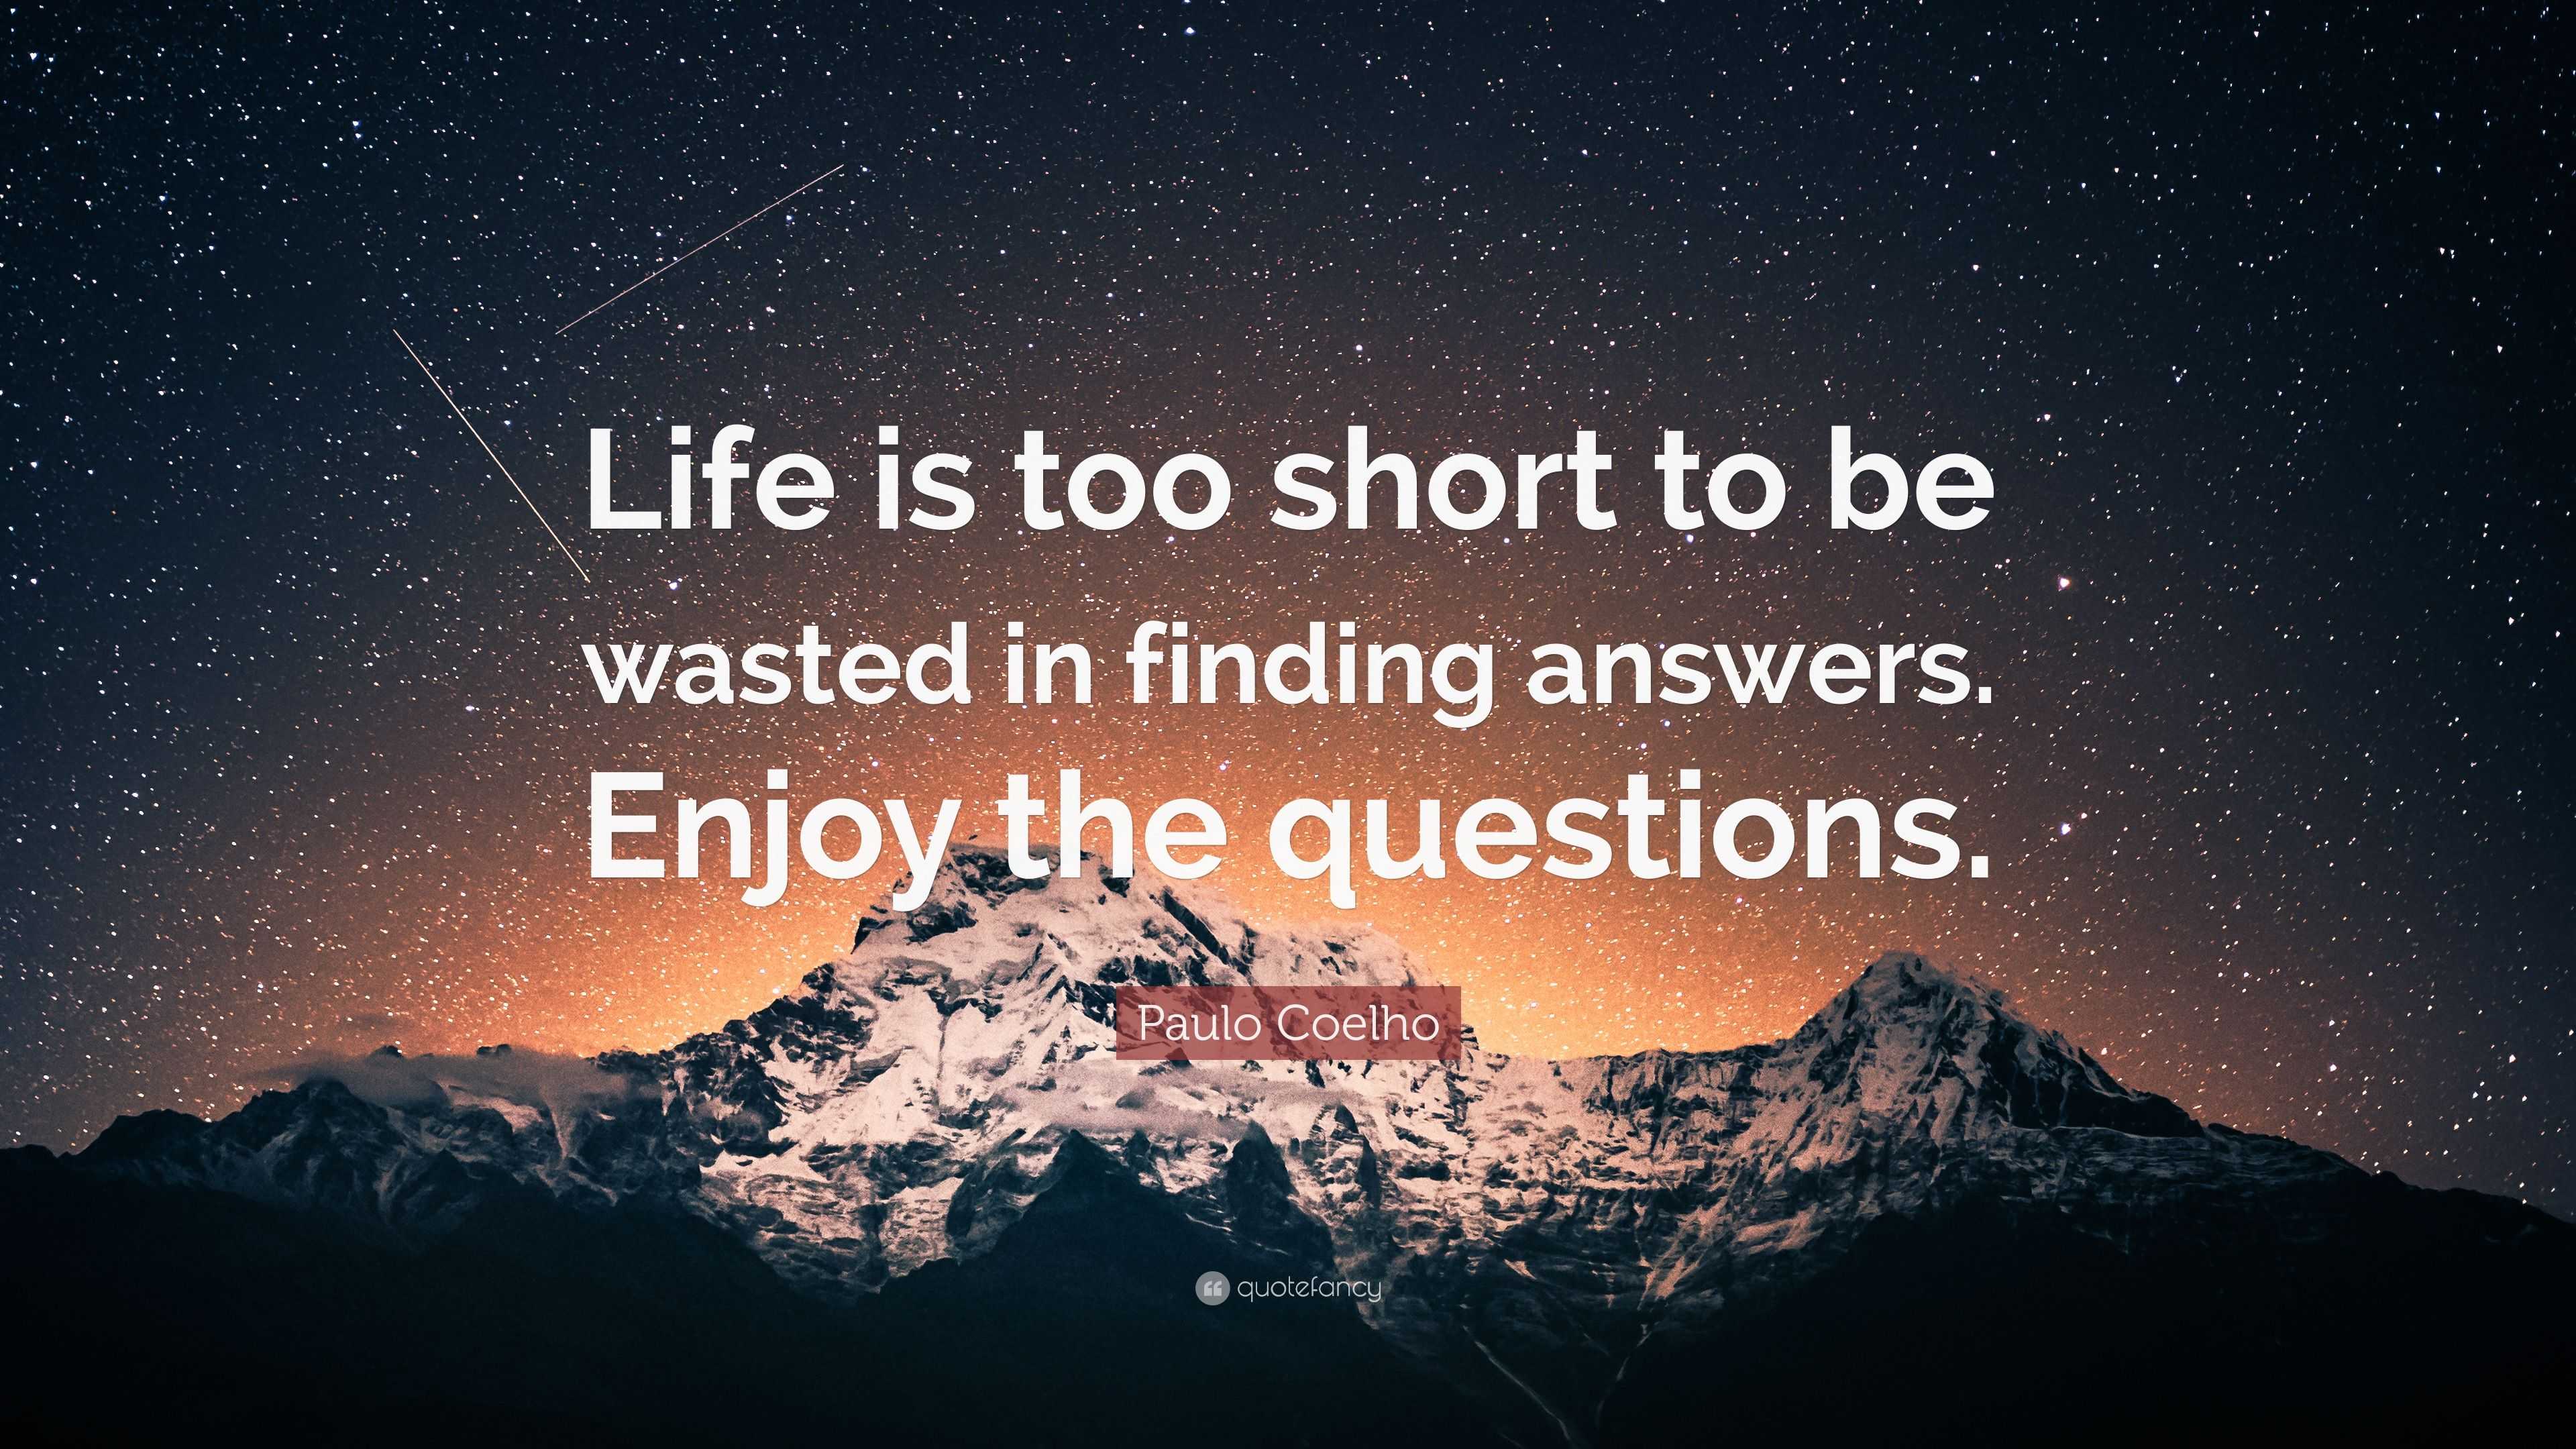 Paulo Coelho Quote: “Life is too short to be wasted in finding answers